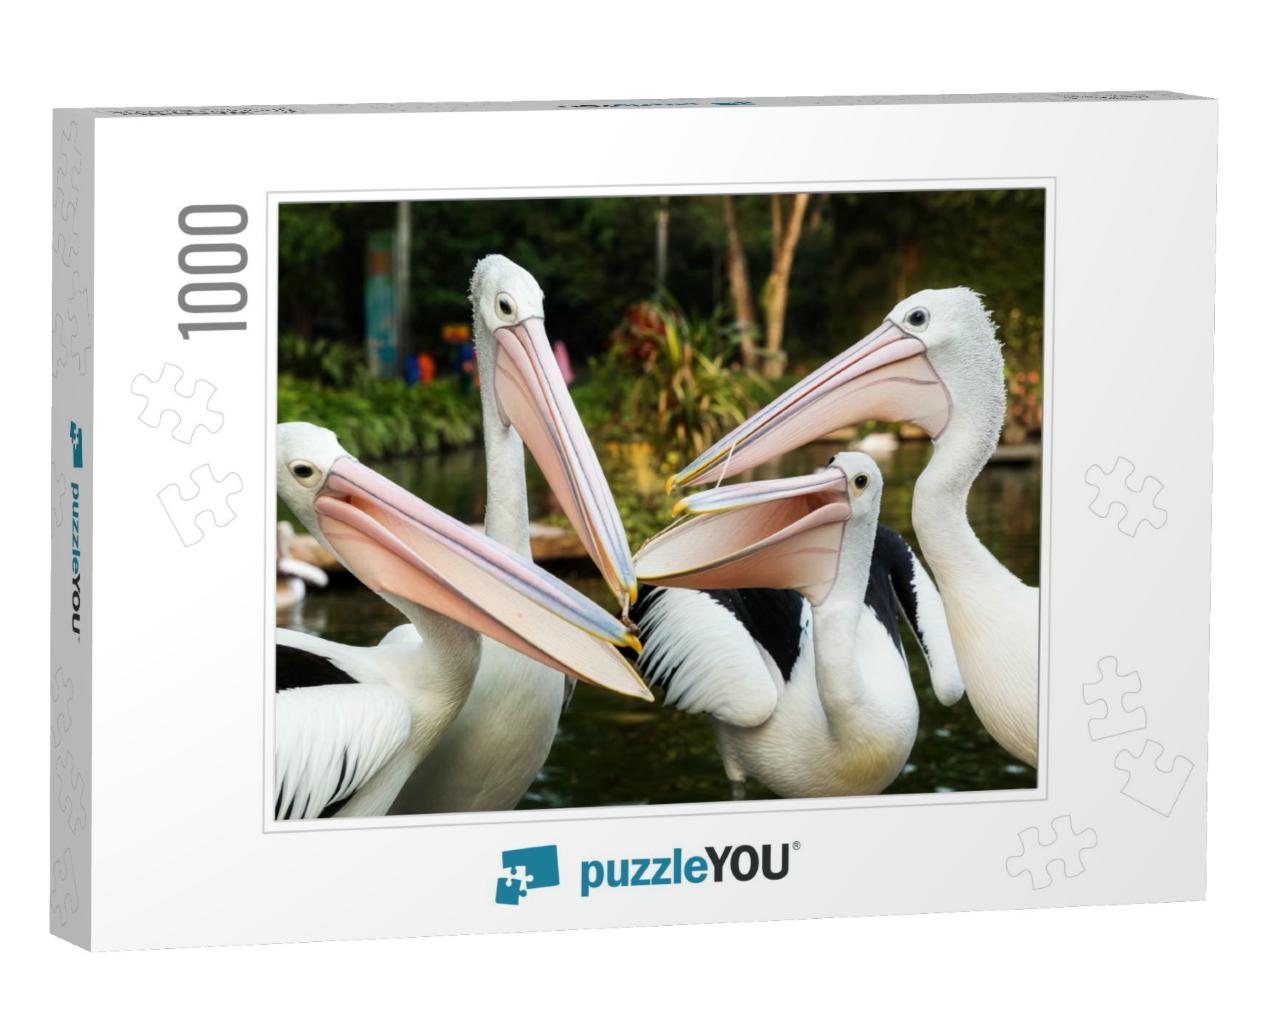 The Great White Pelican Pelecanus Onocrotalus Aka the Eas... Jigsaw Puzzle with 1000 pieces